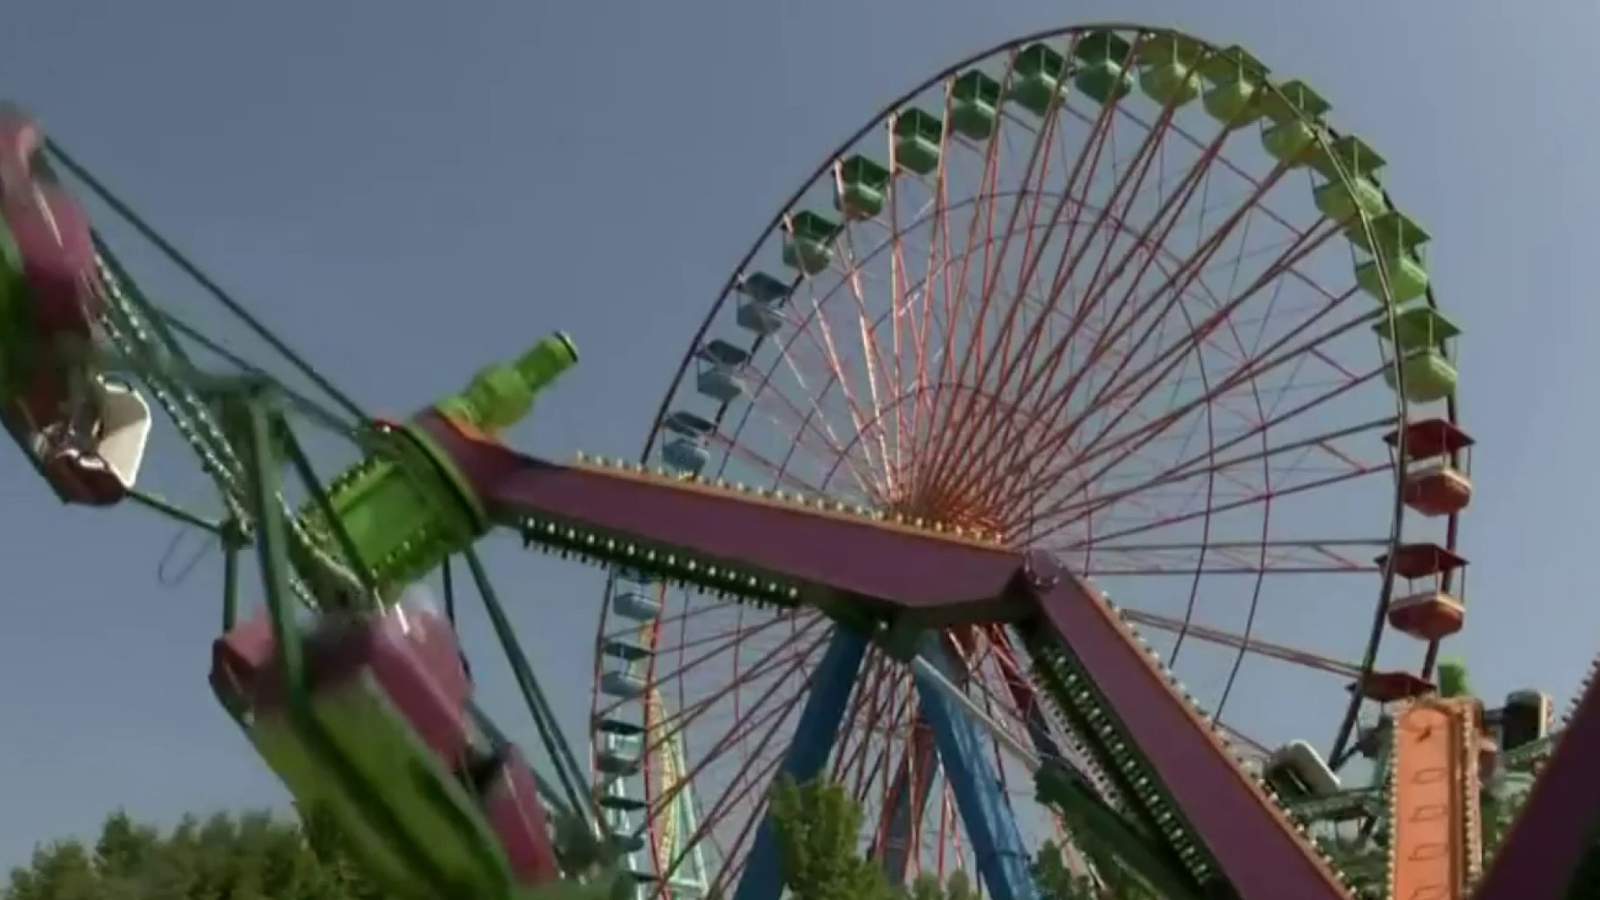 Cedar Point reopens today with changes: What to know